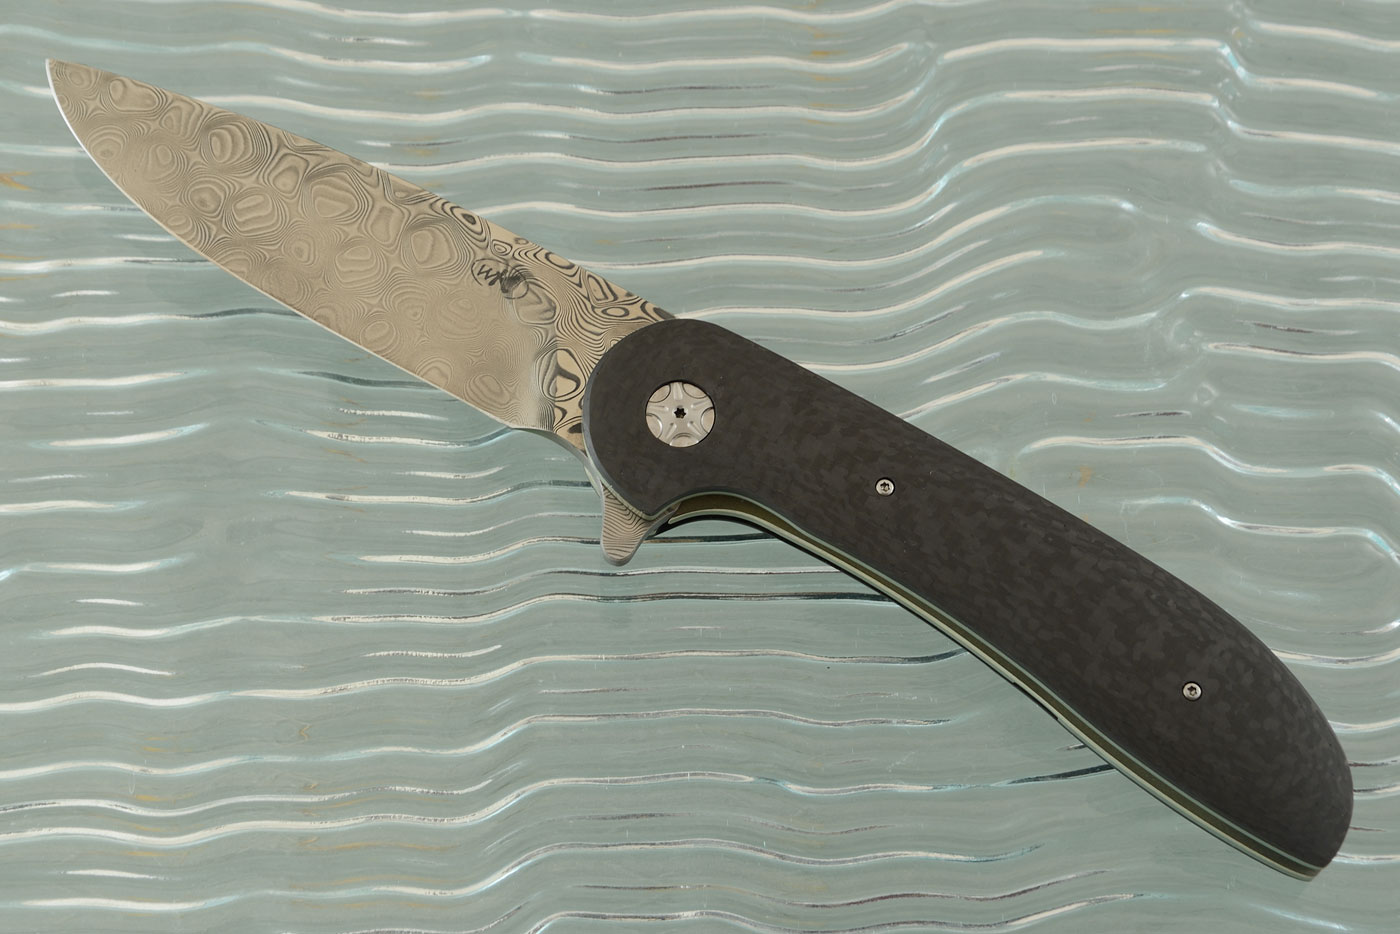 H1 Flipper with Carbon Fiber and Damasteel